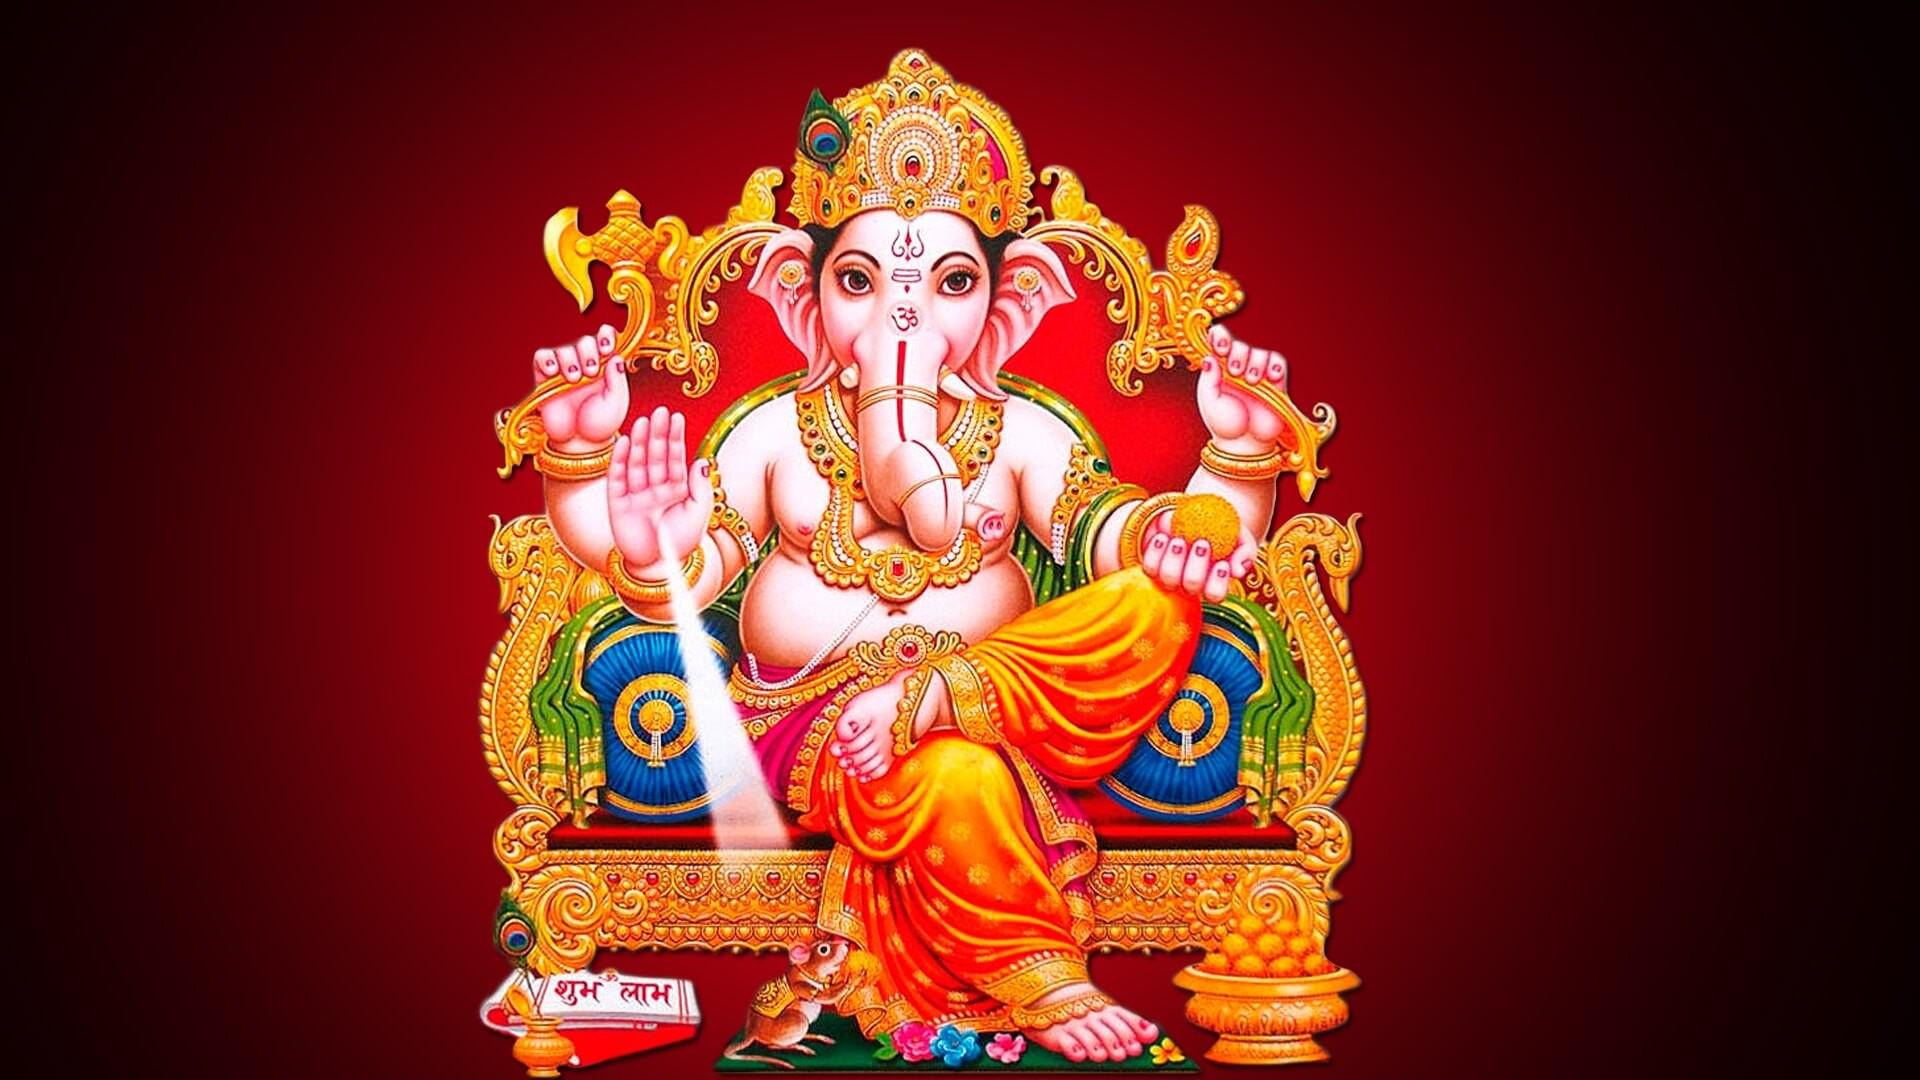 20 Best 4k wallpaper ganesh You Can Use It At No Cost - Aesthetic Arena